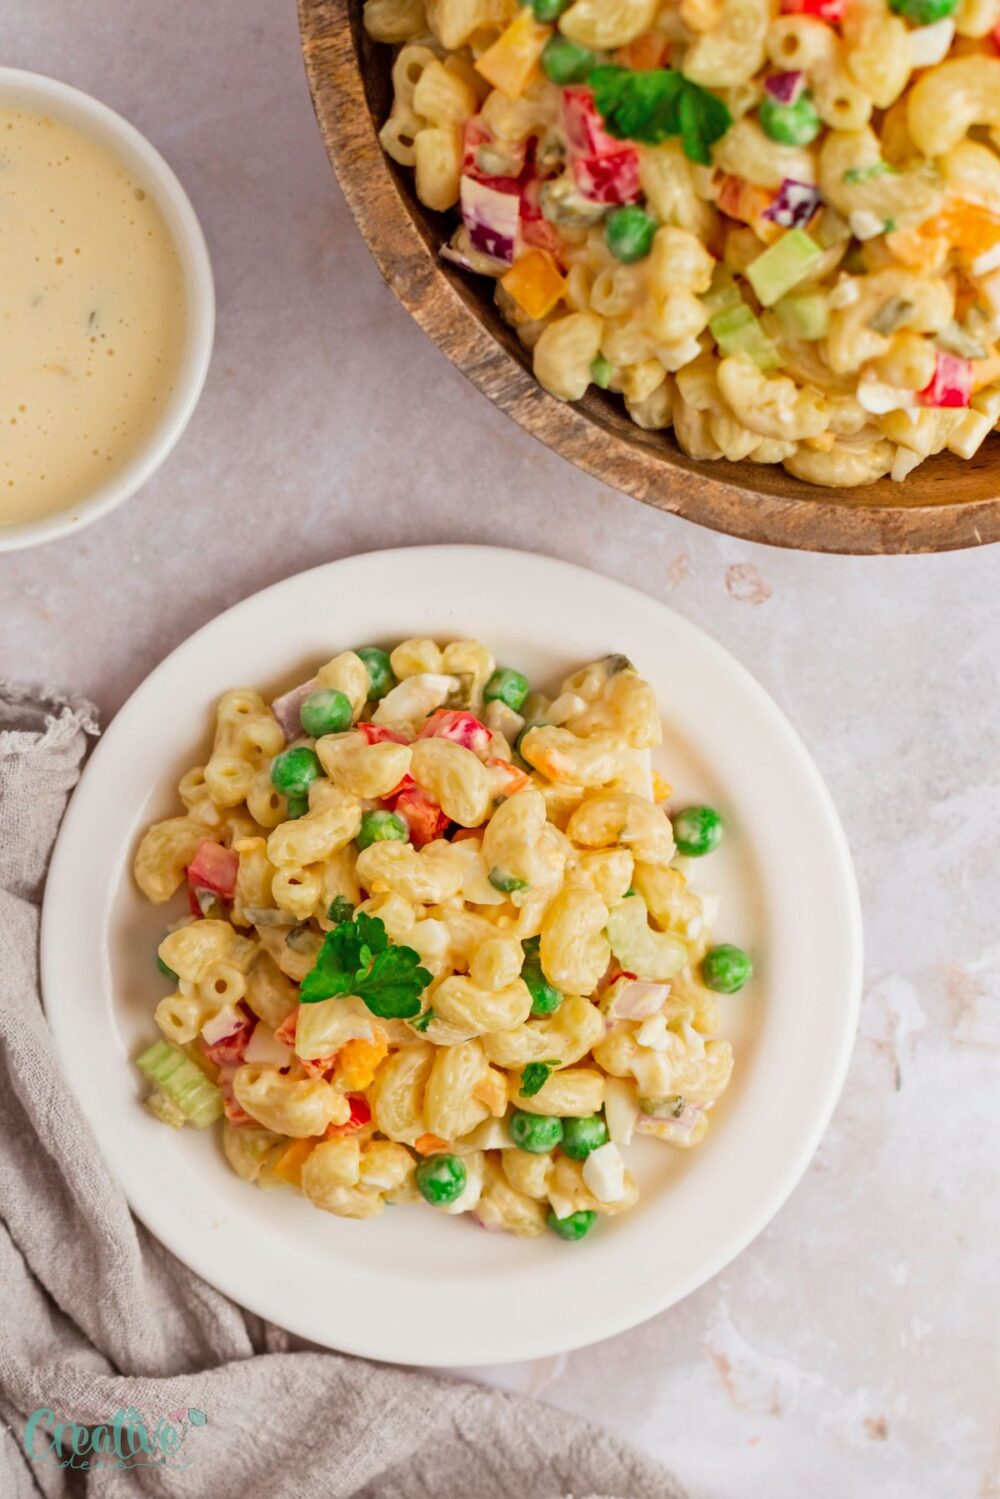 Whether you're hosting a barbecue or just need a quick side dish for a family dinner, cold elbow macaroni salad is sure to be a hit with everyone.